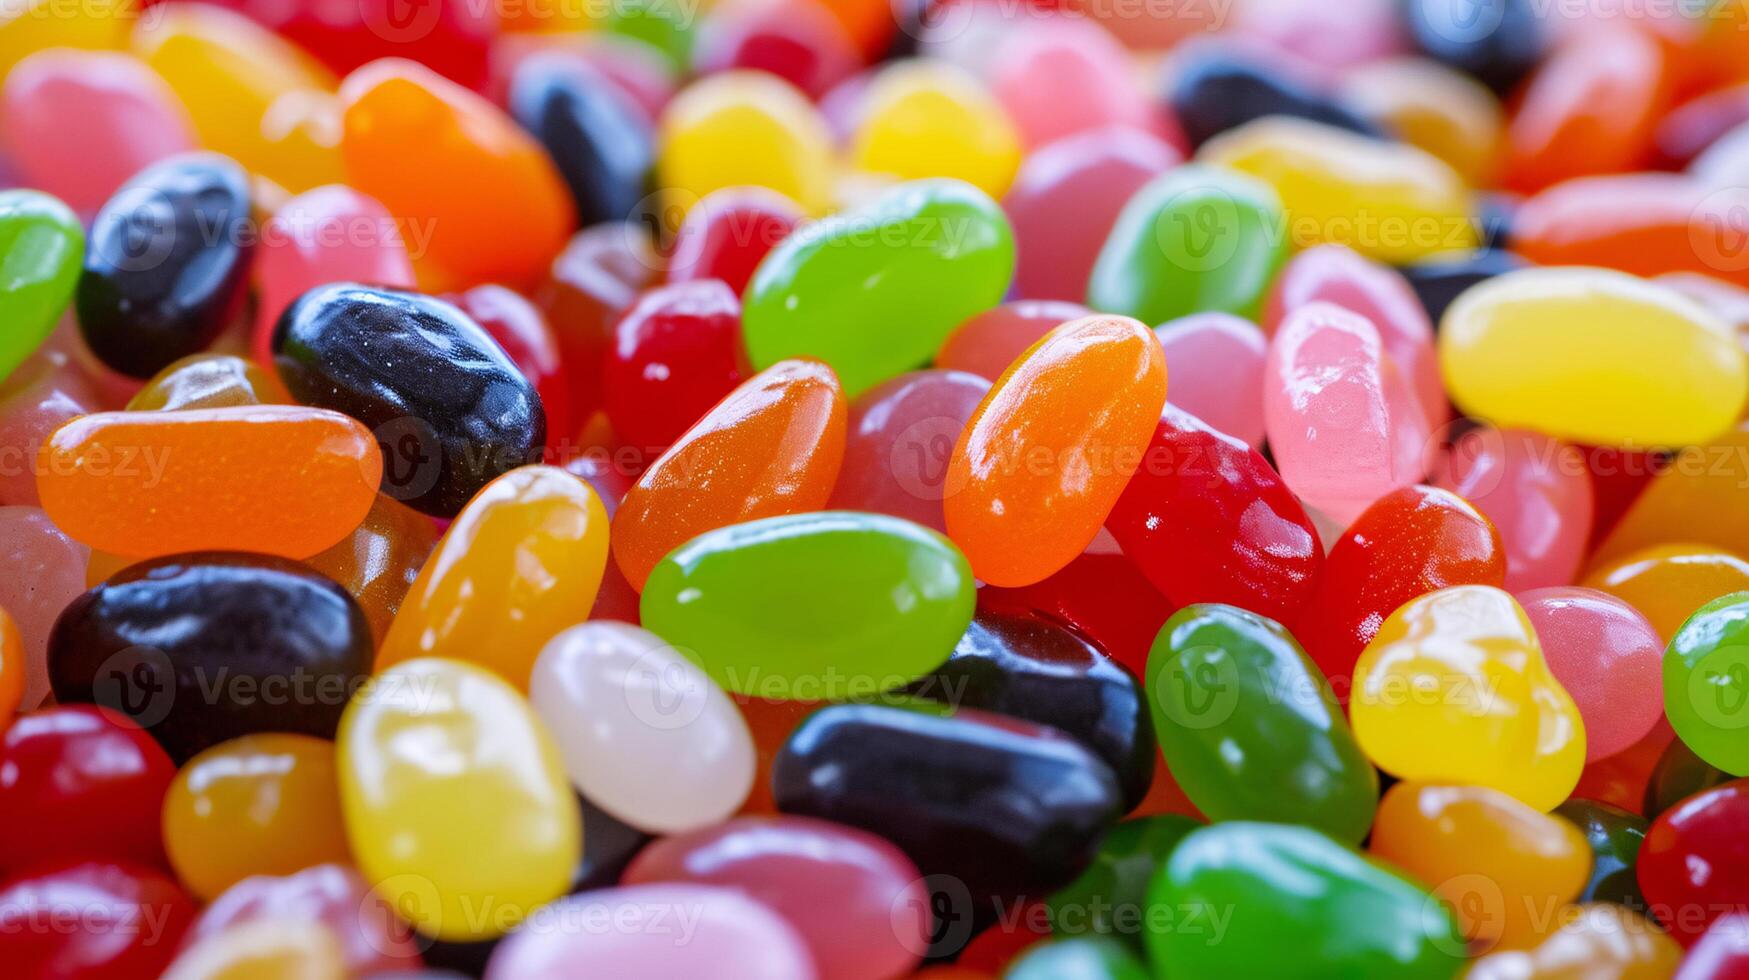 burst of color and sweetness as the screen comes alive with a vibrant display of assorted jelly beans photo